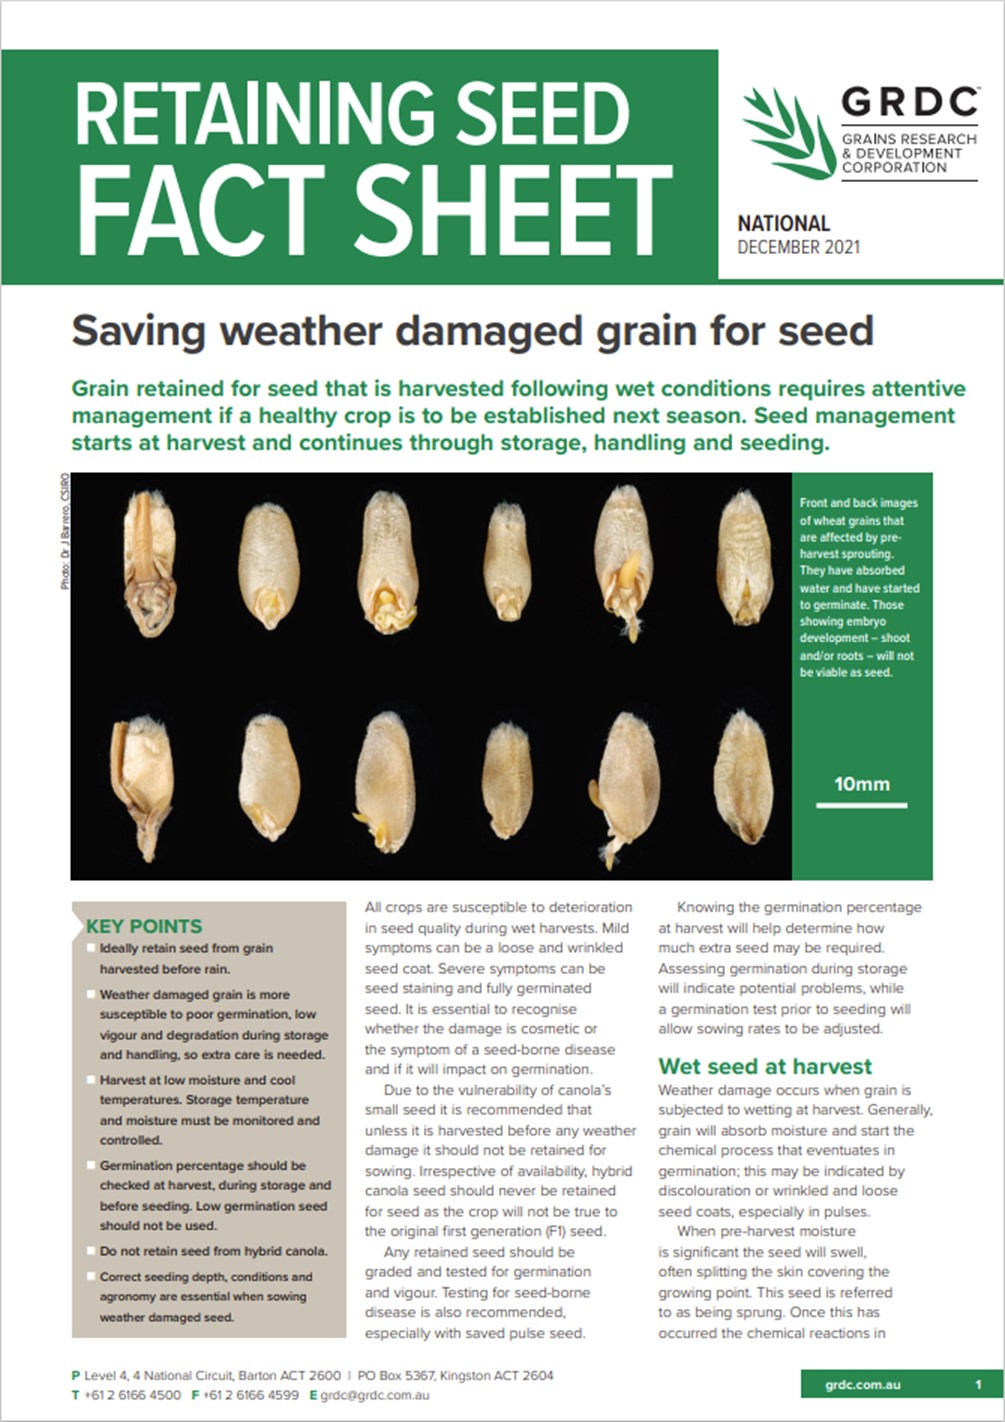 Seed Storage and Germination Recommendations